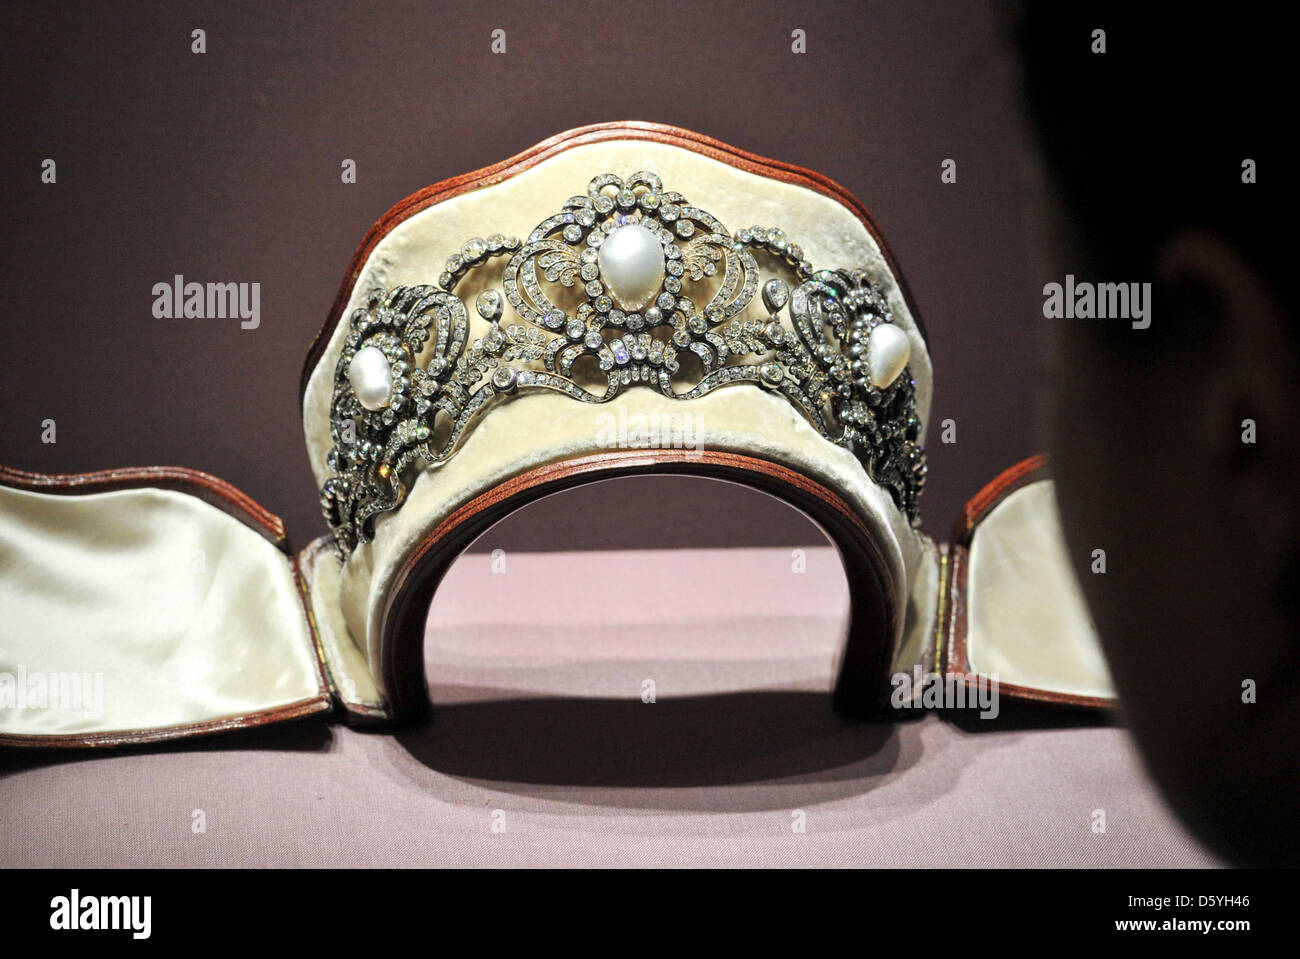 A tiara, which once belonged to archduchess Marie Valerie from Austria, is presented at the Jewellery Museum Pforzheim, Germany, 25 October 2012. The work made in 1913 is part of the exhibition 'Foam-arisen and Legendary - Jewellery and Pearls' which is featured between 26 October 2012 and 27 January 2013. Photo: Uli Deck Stock Photo